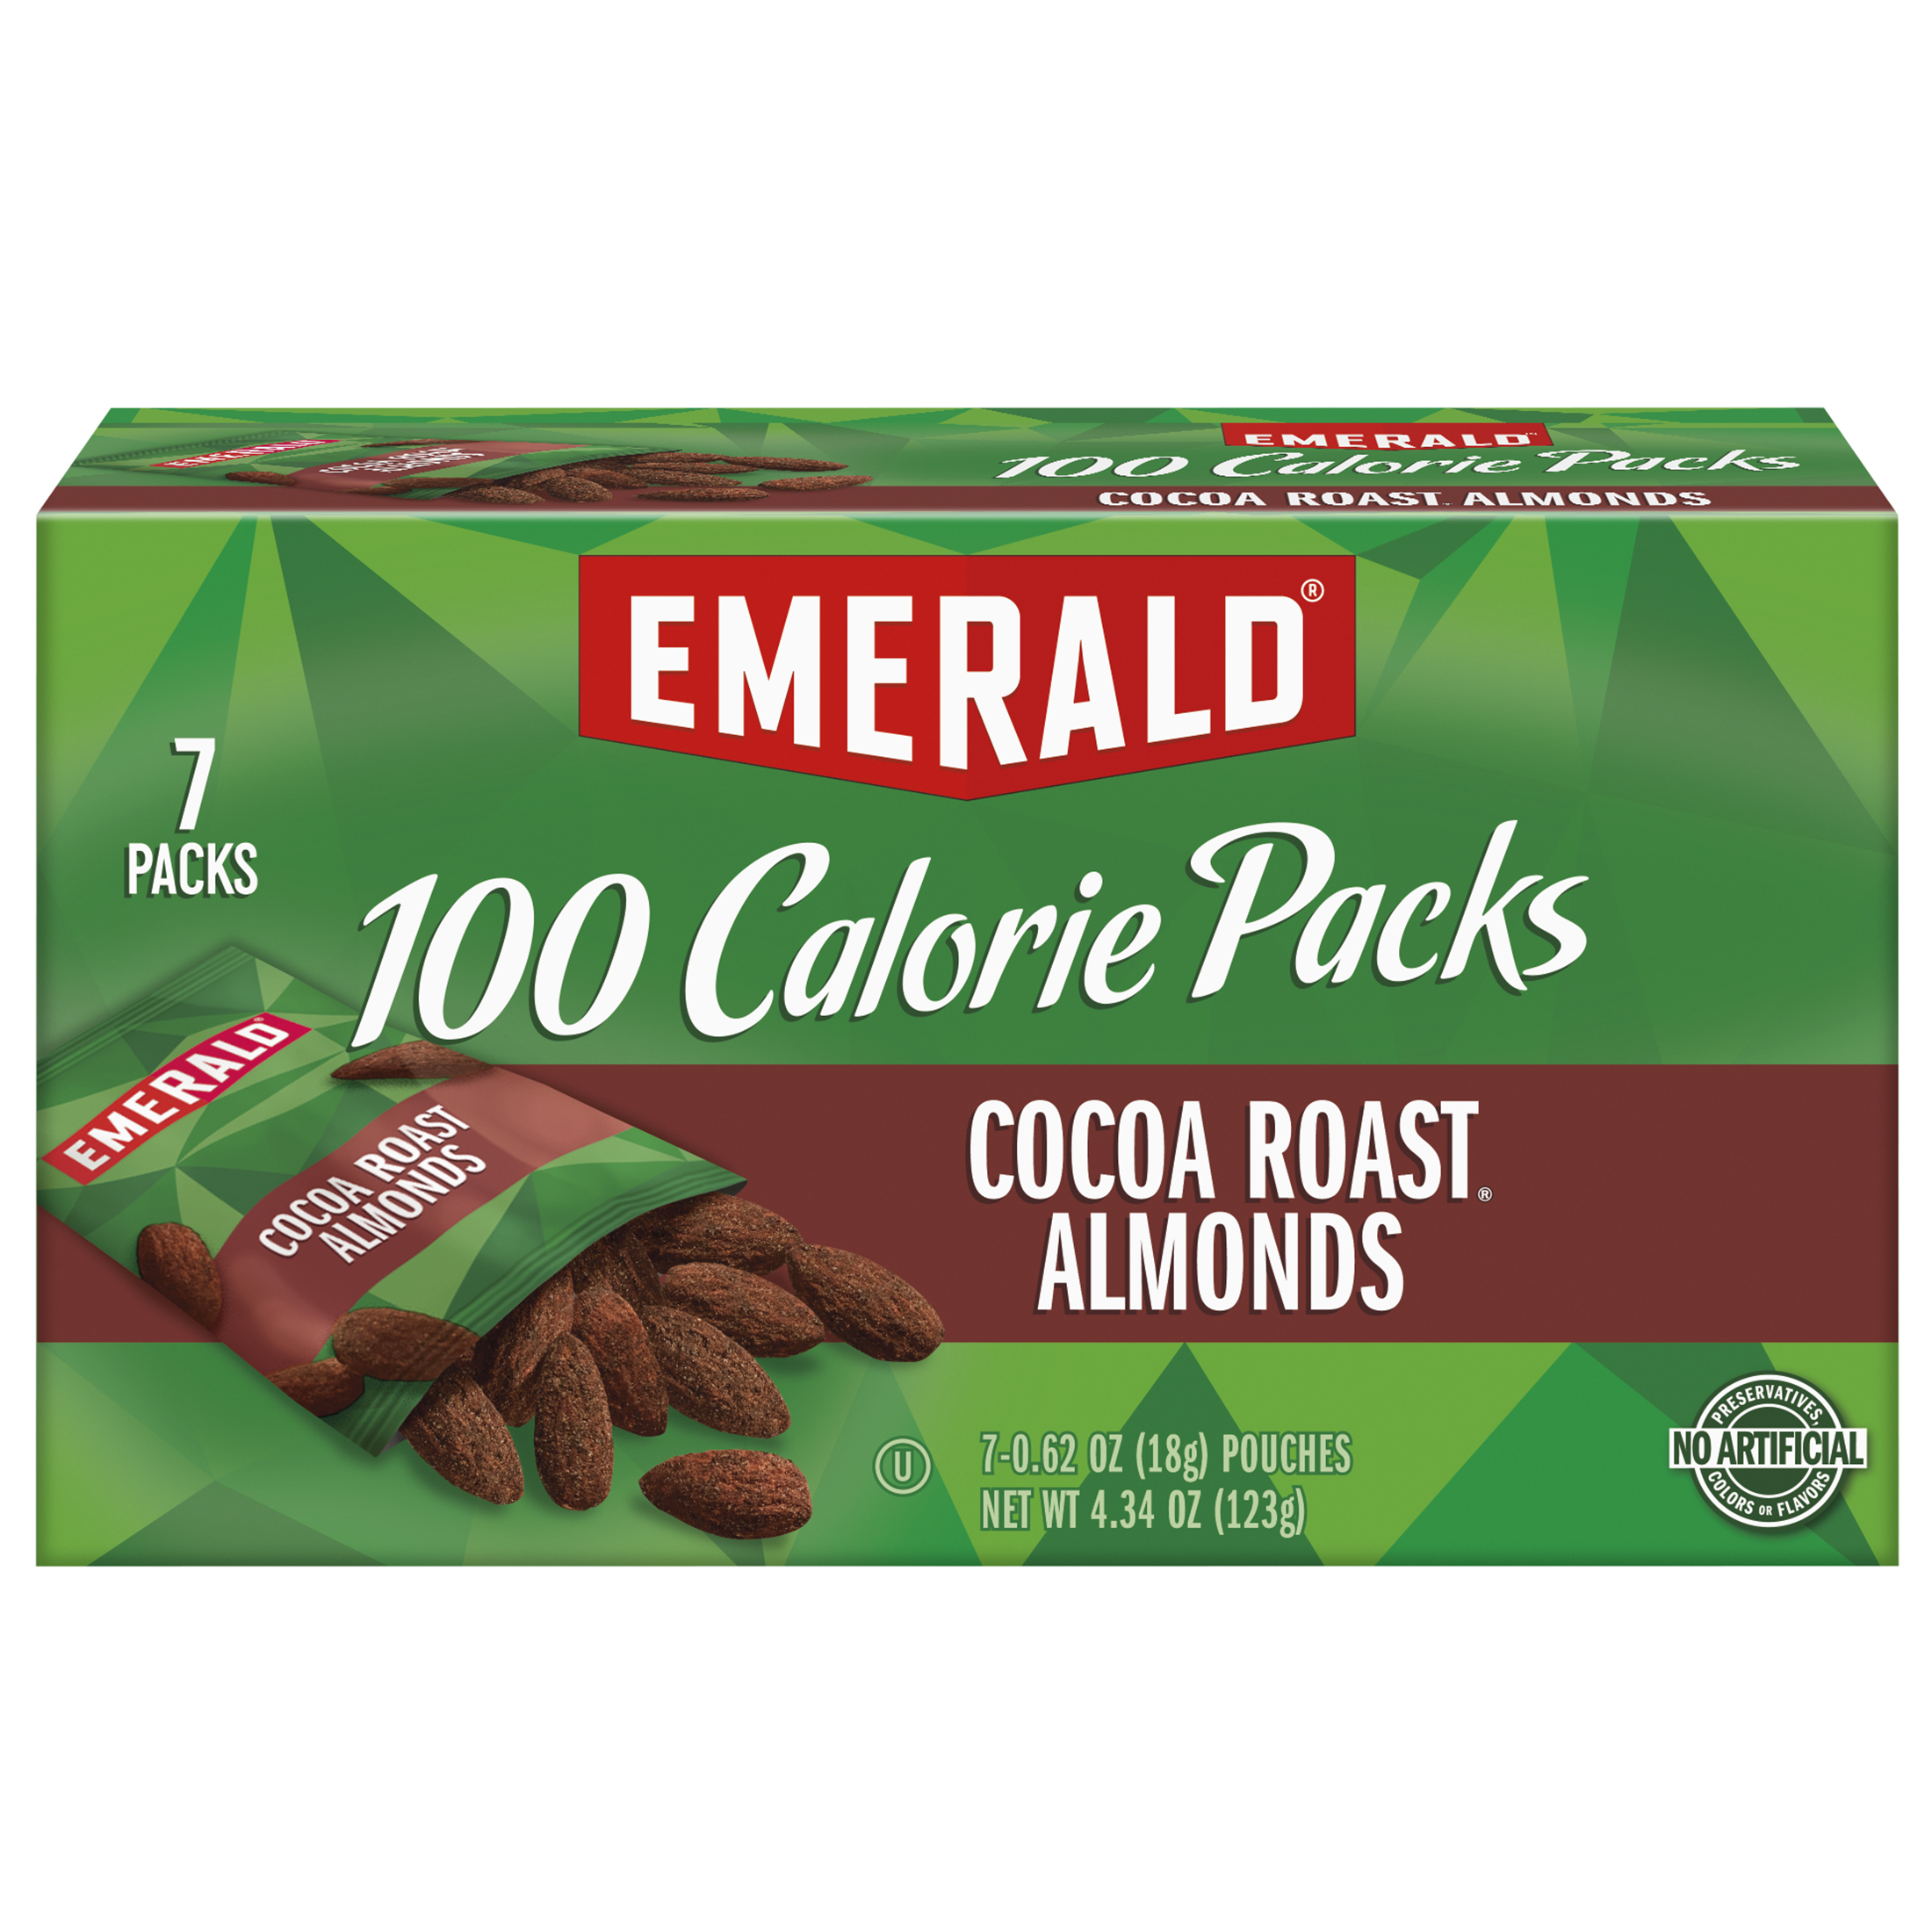 Emerald Nuts Cocoa Roast Almonds, 100 Calorie Packs, 7 Count, 4.34 oz - image 1 of 6